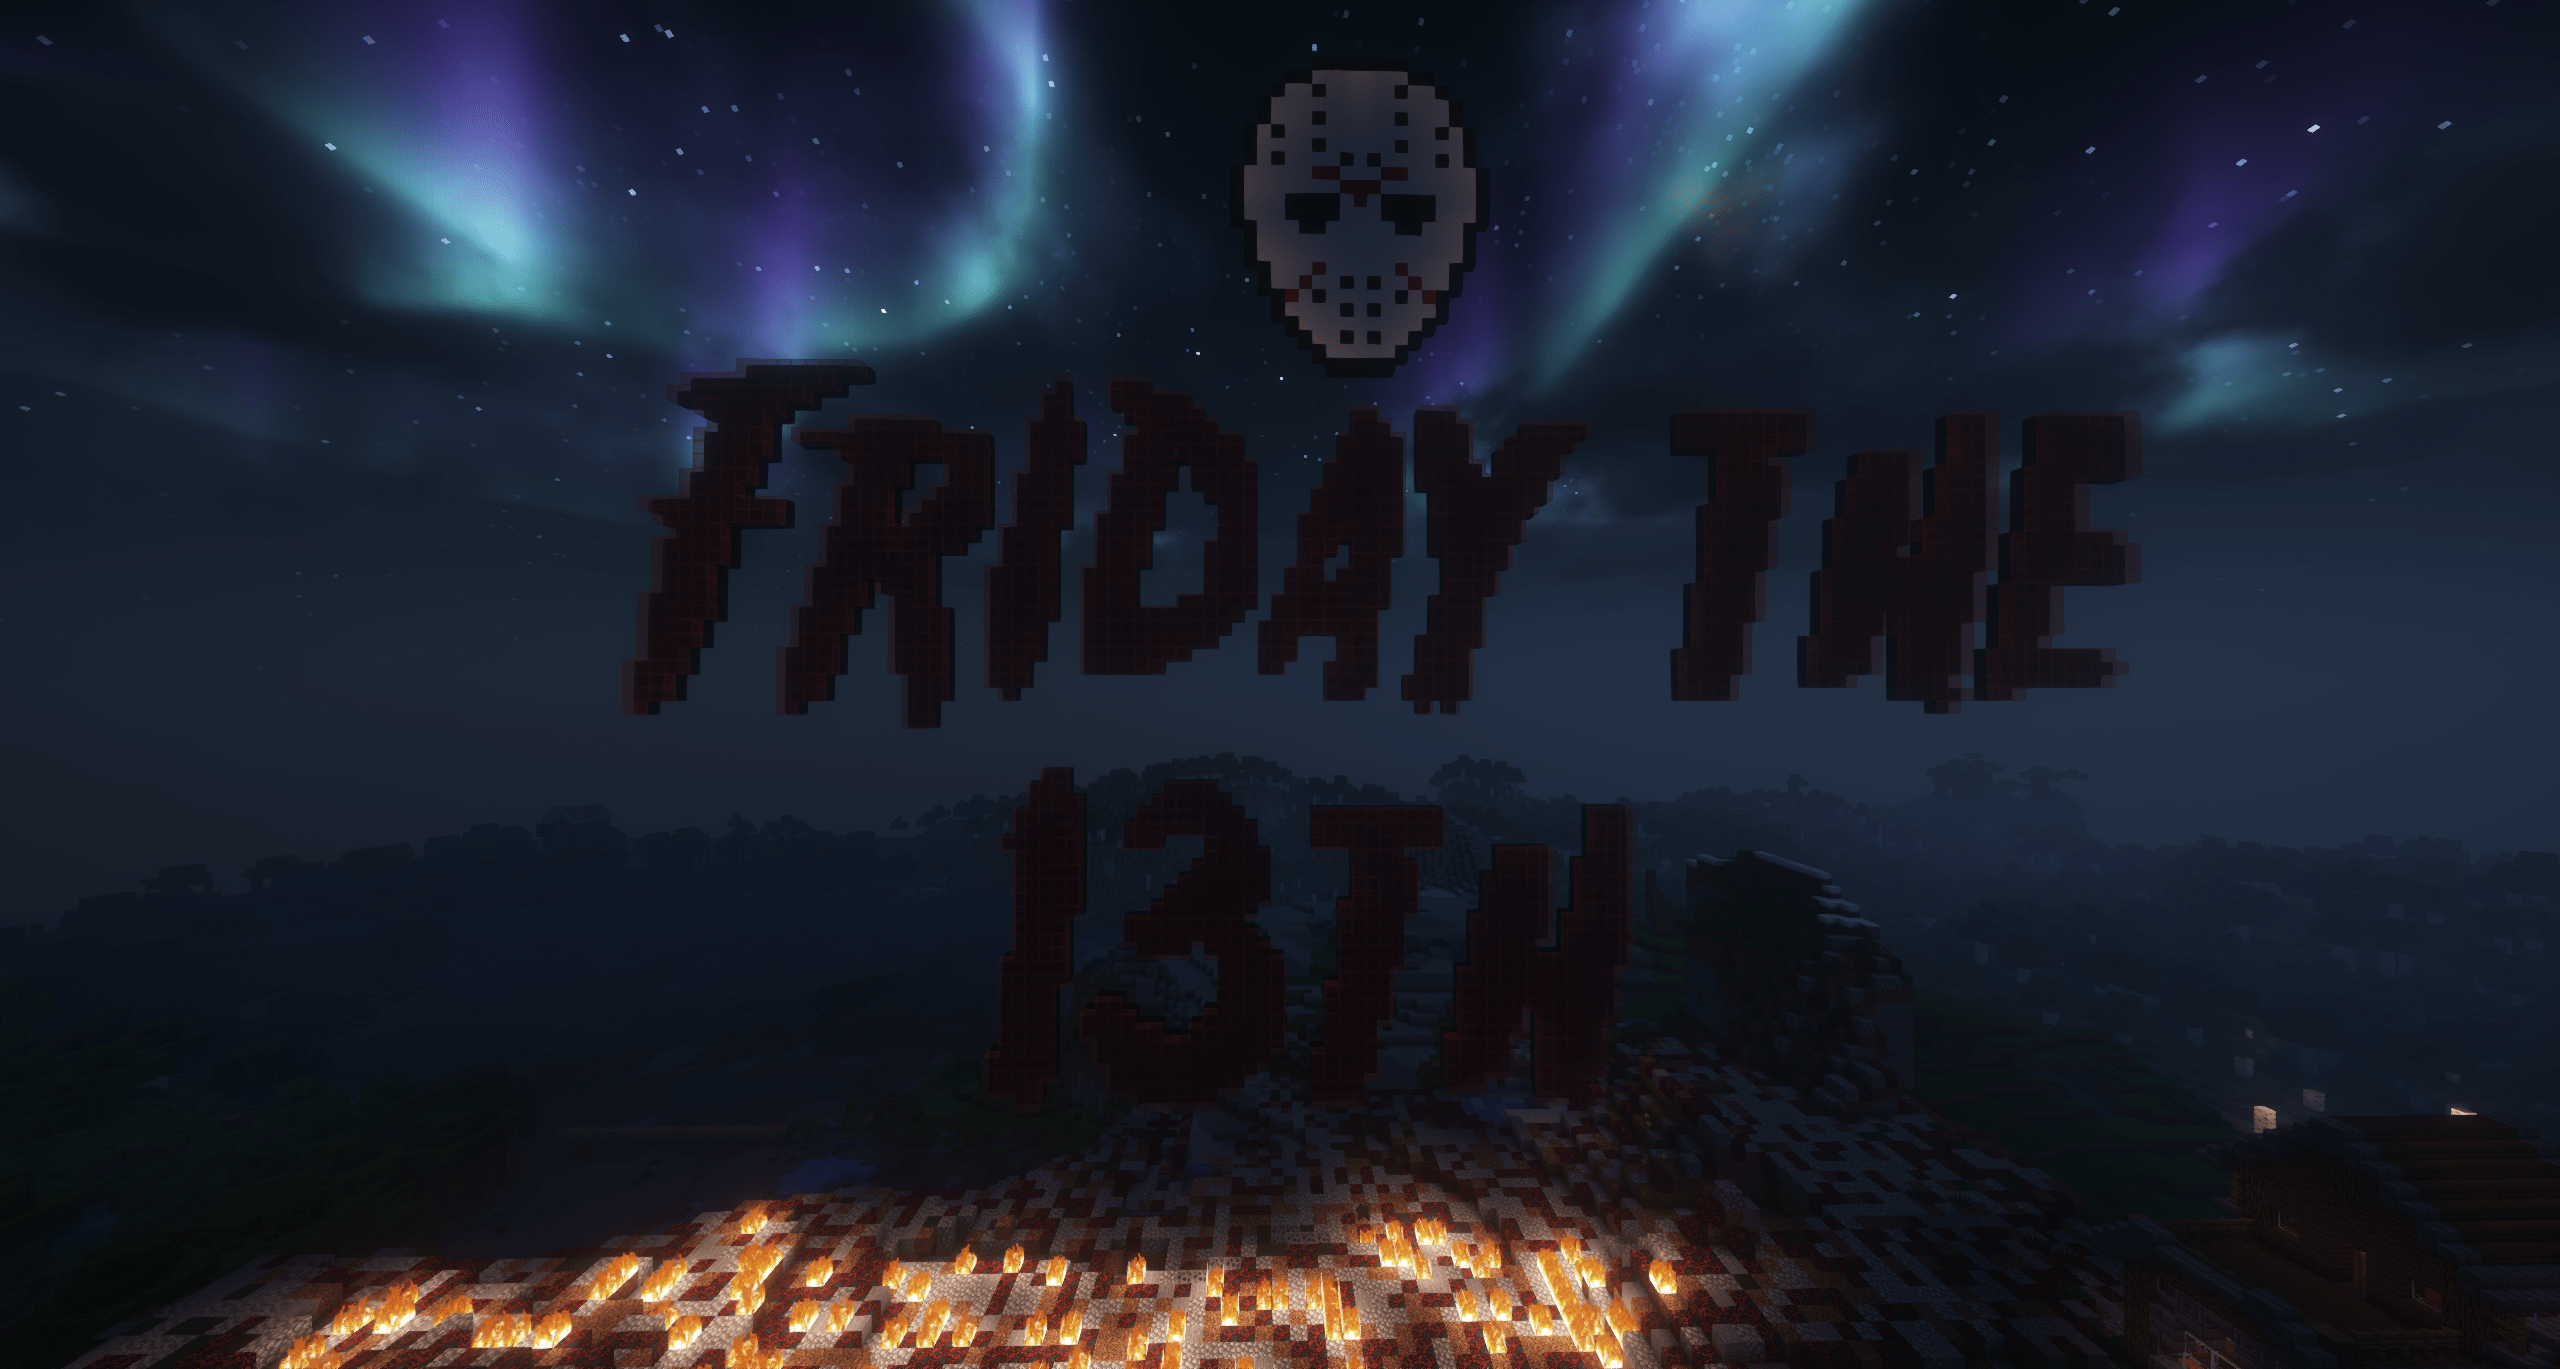 Screenshot from Friday the 13th Minecraft Server